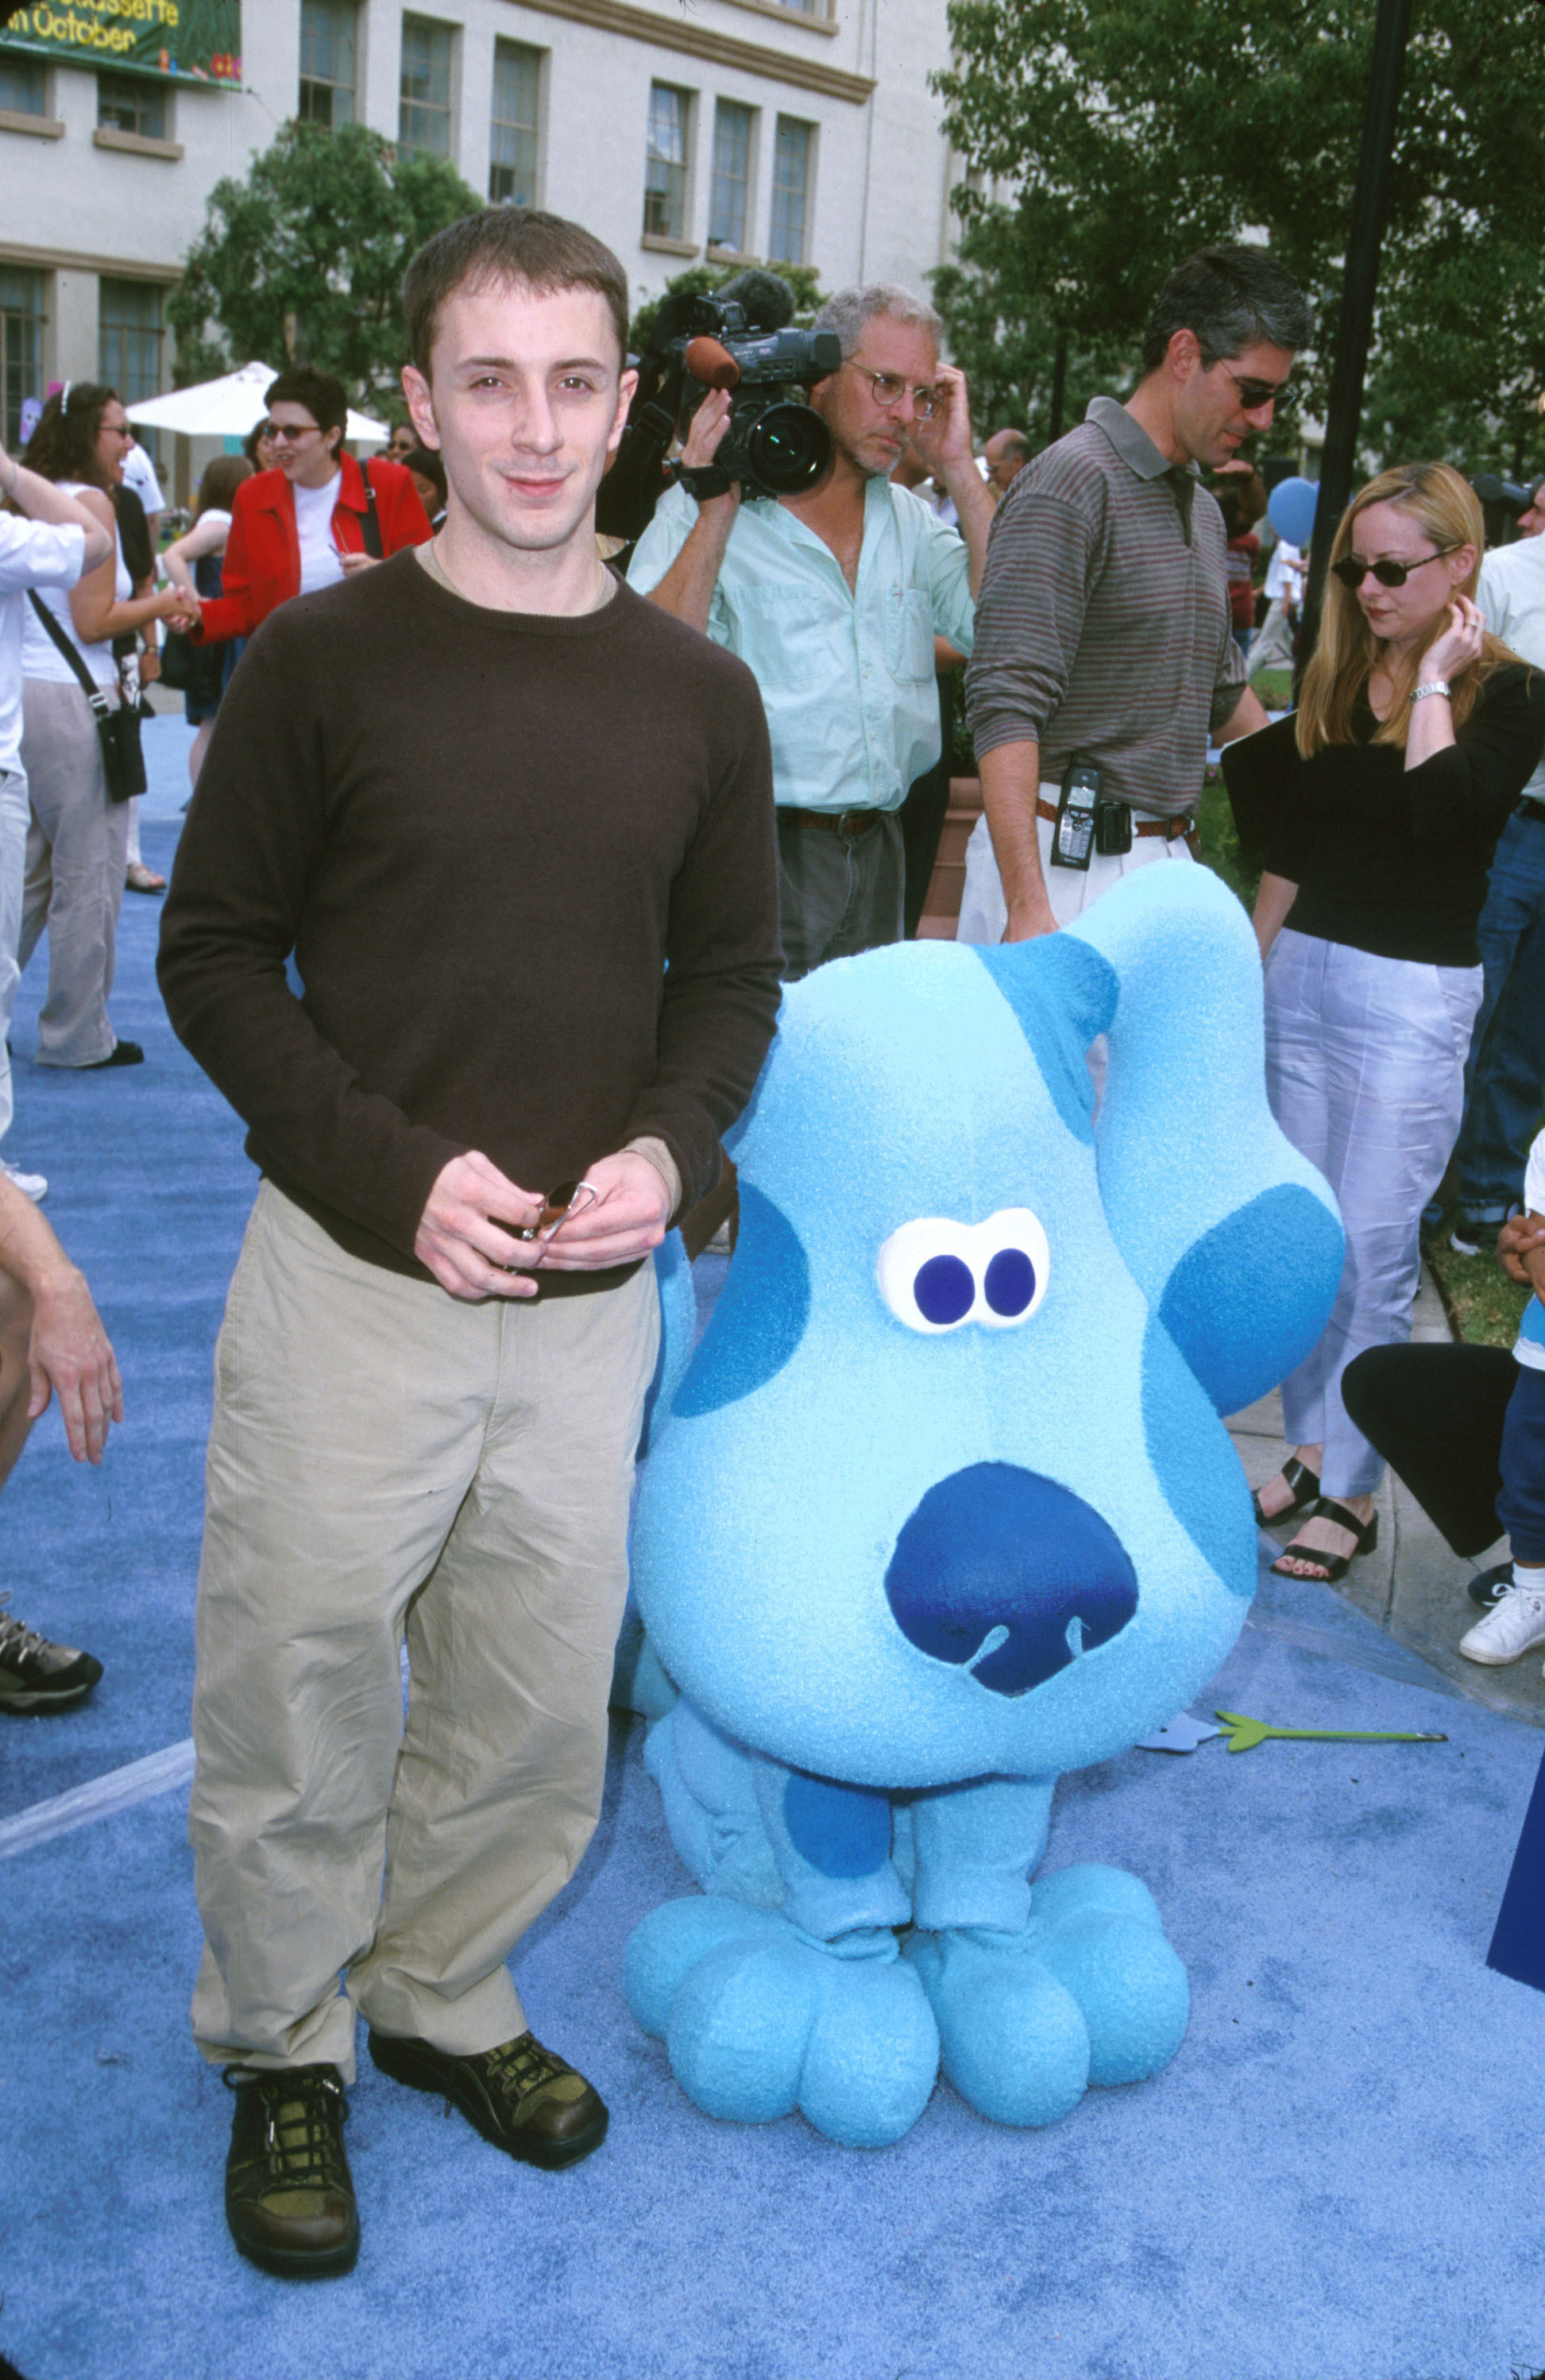 Steve on the blue carpet for an event standing next to an oversized plush version of Blue